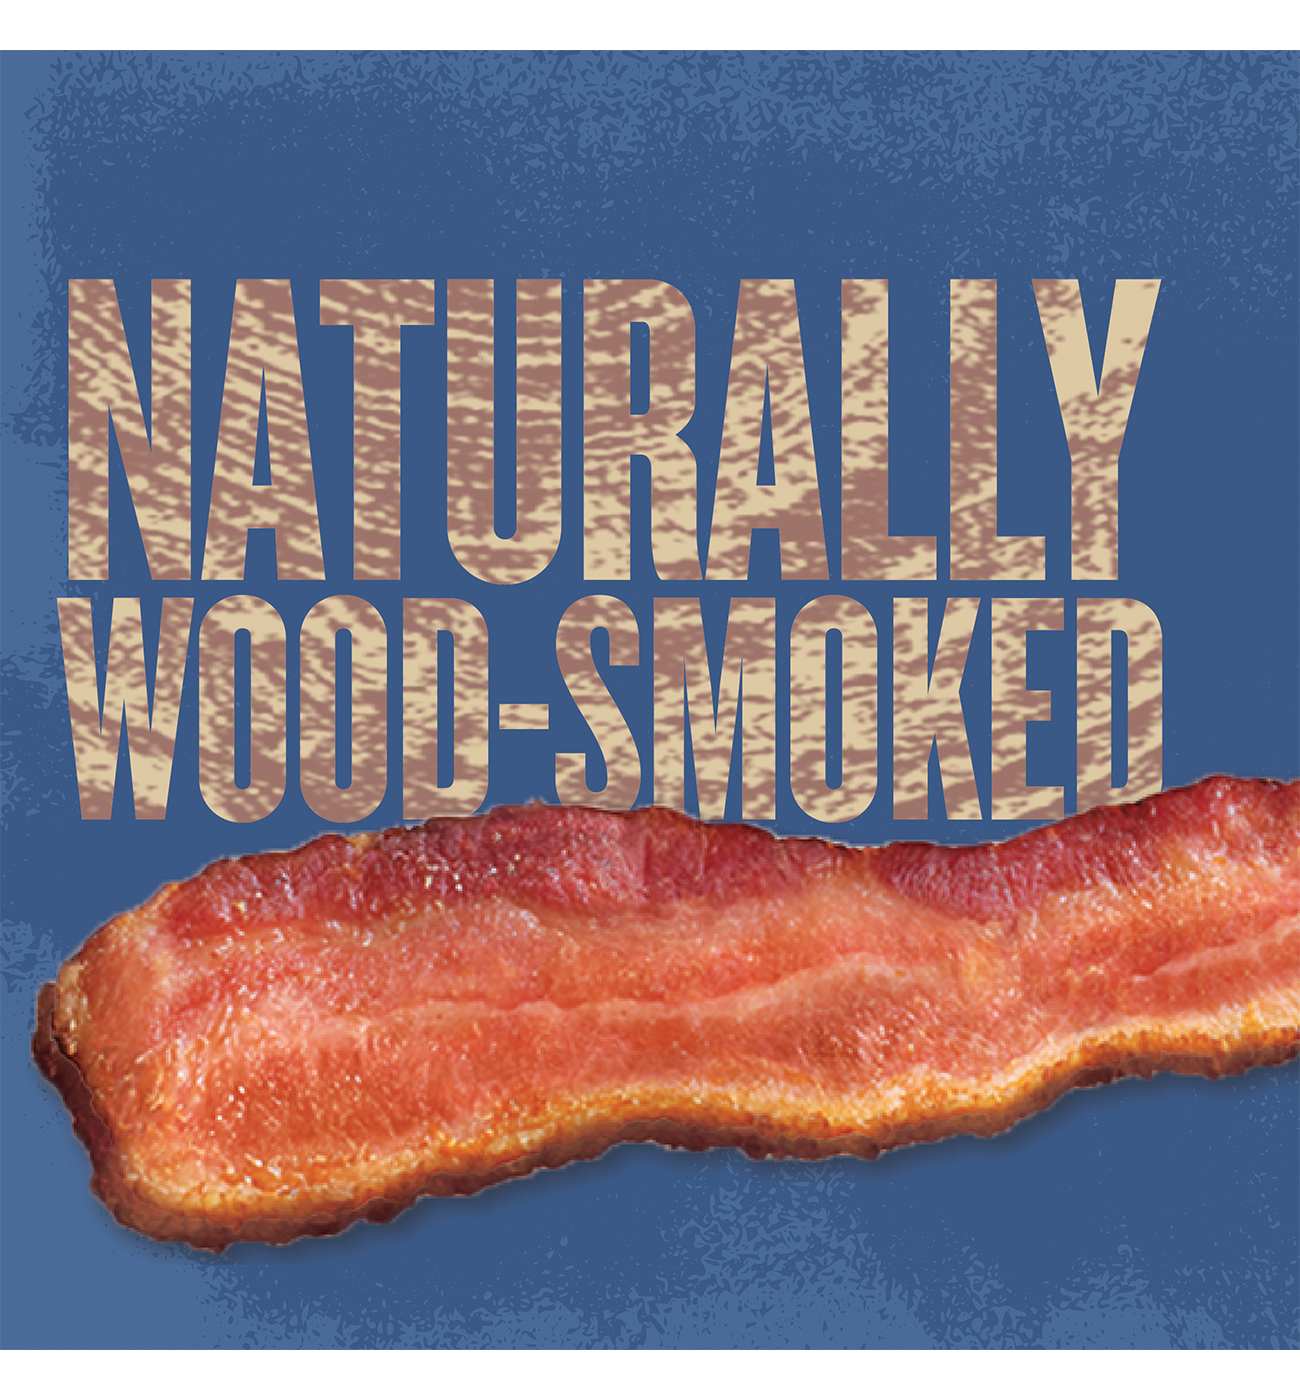 Wright Brand Real Wood Double Smoked Thick Cut Bacon; image 4 of 6